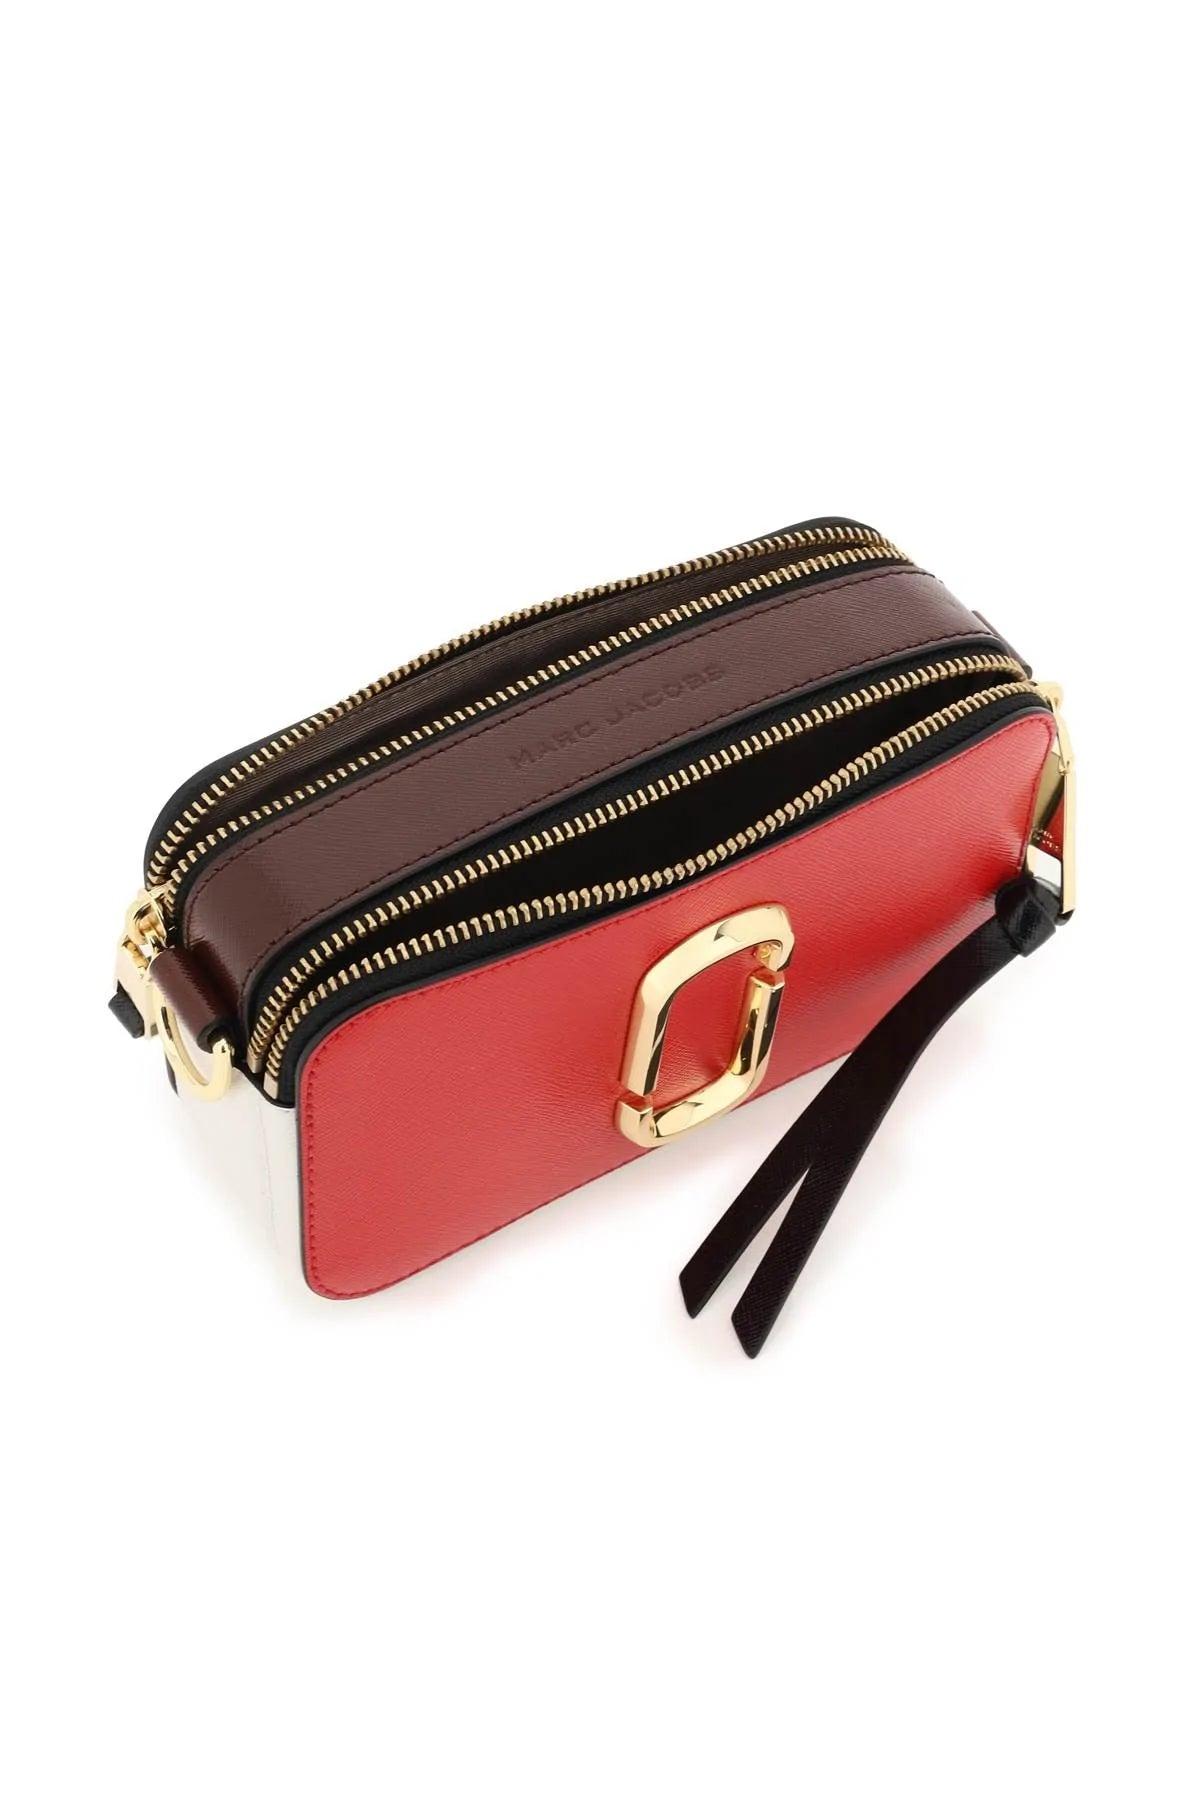 The Snapshot Black & Red Leather Camera Bag